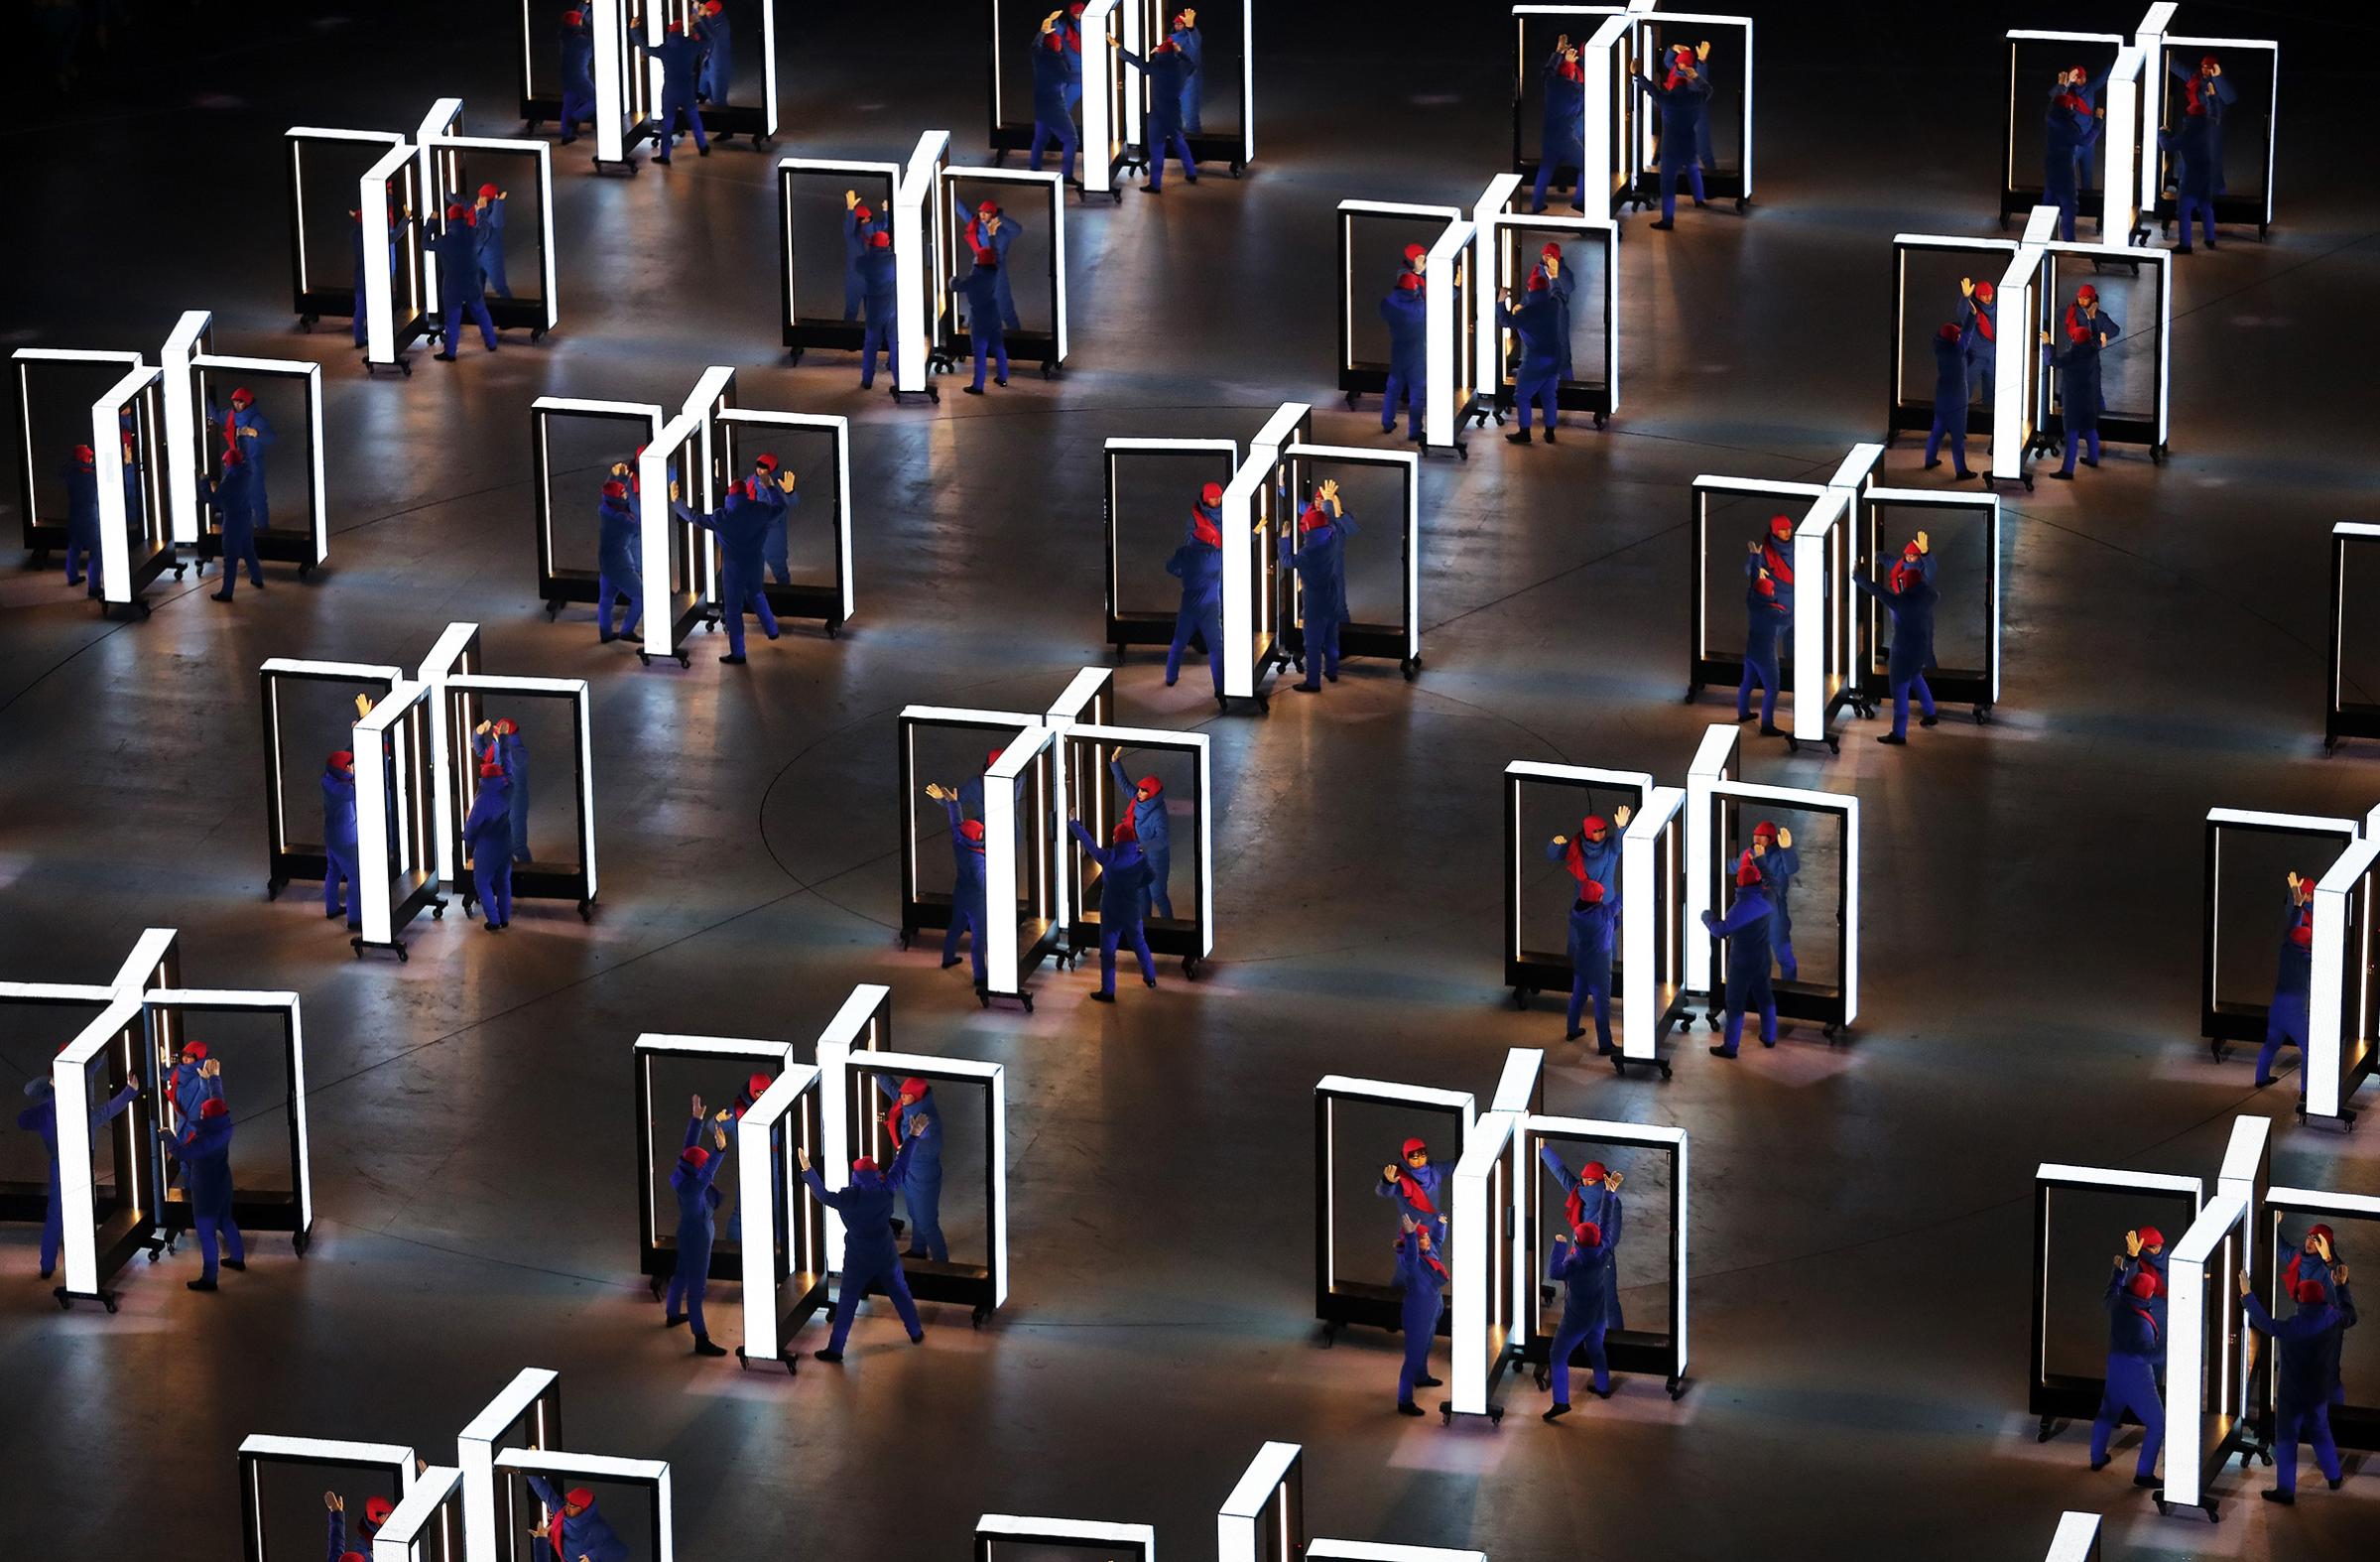 Performers entertain during the Opening Ceremony of the PyeongChang 2018 Winter Olympic Games.